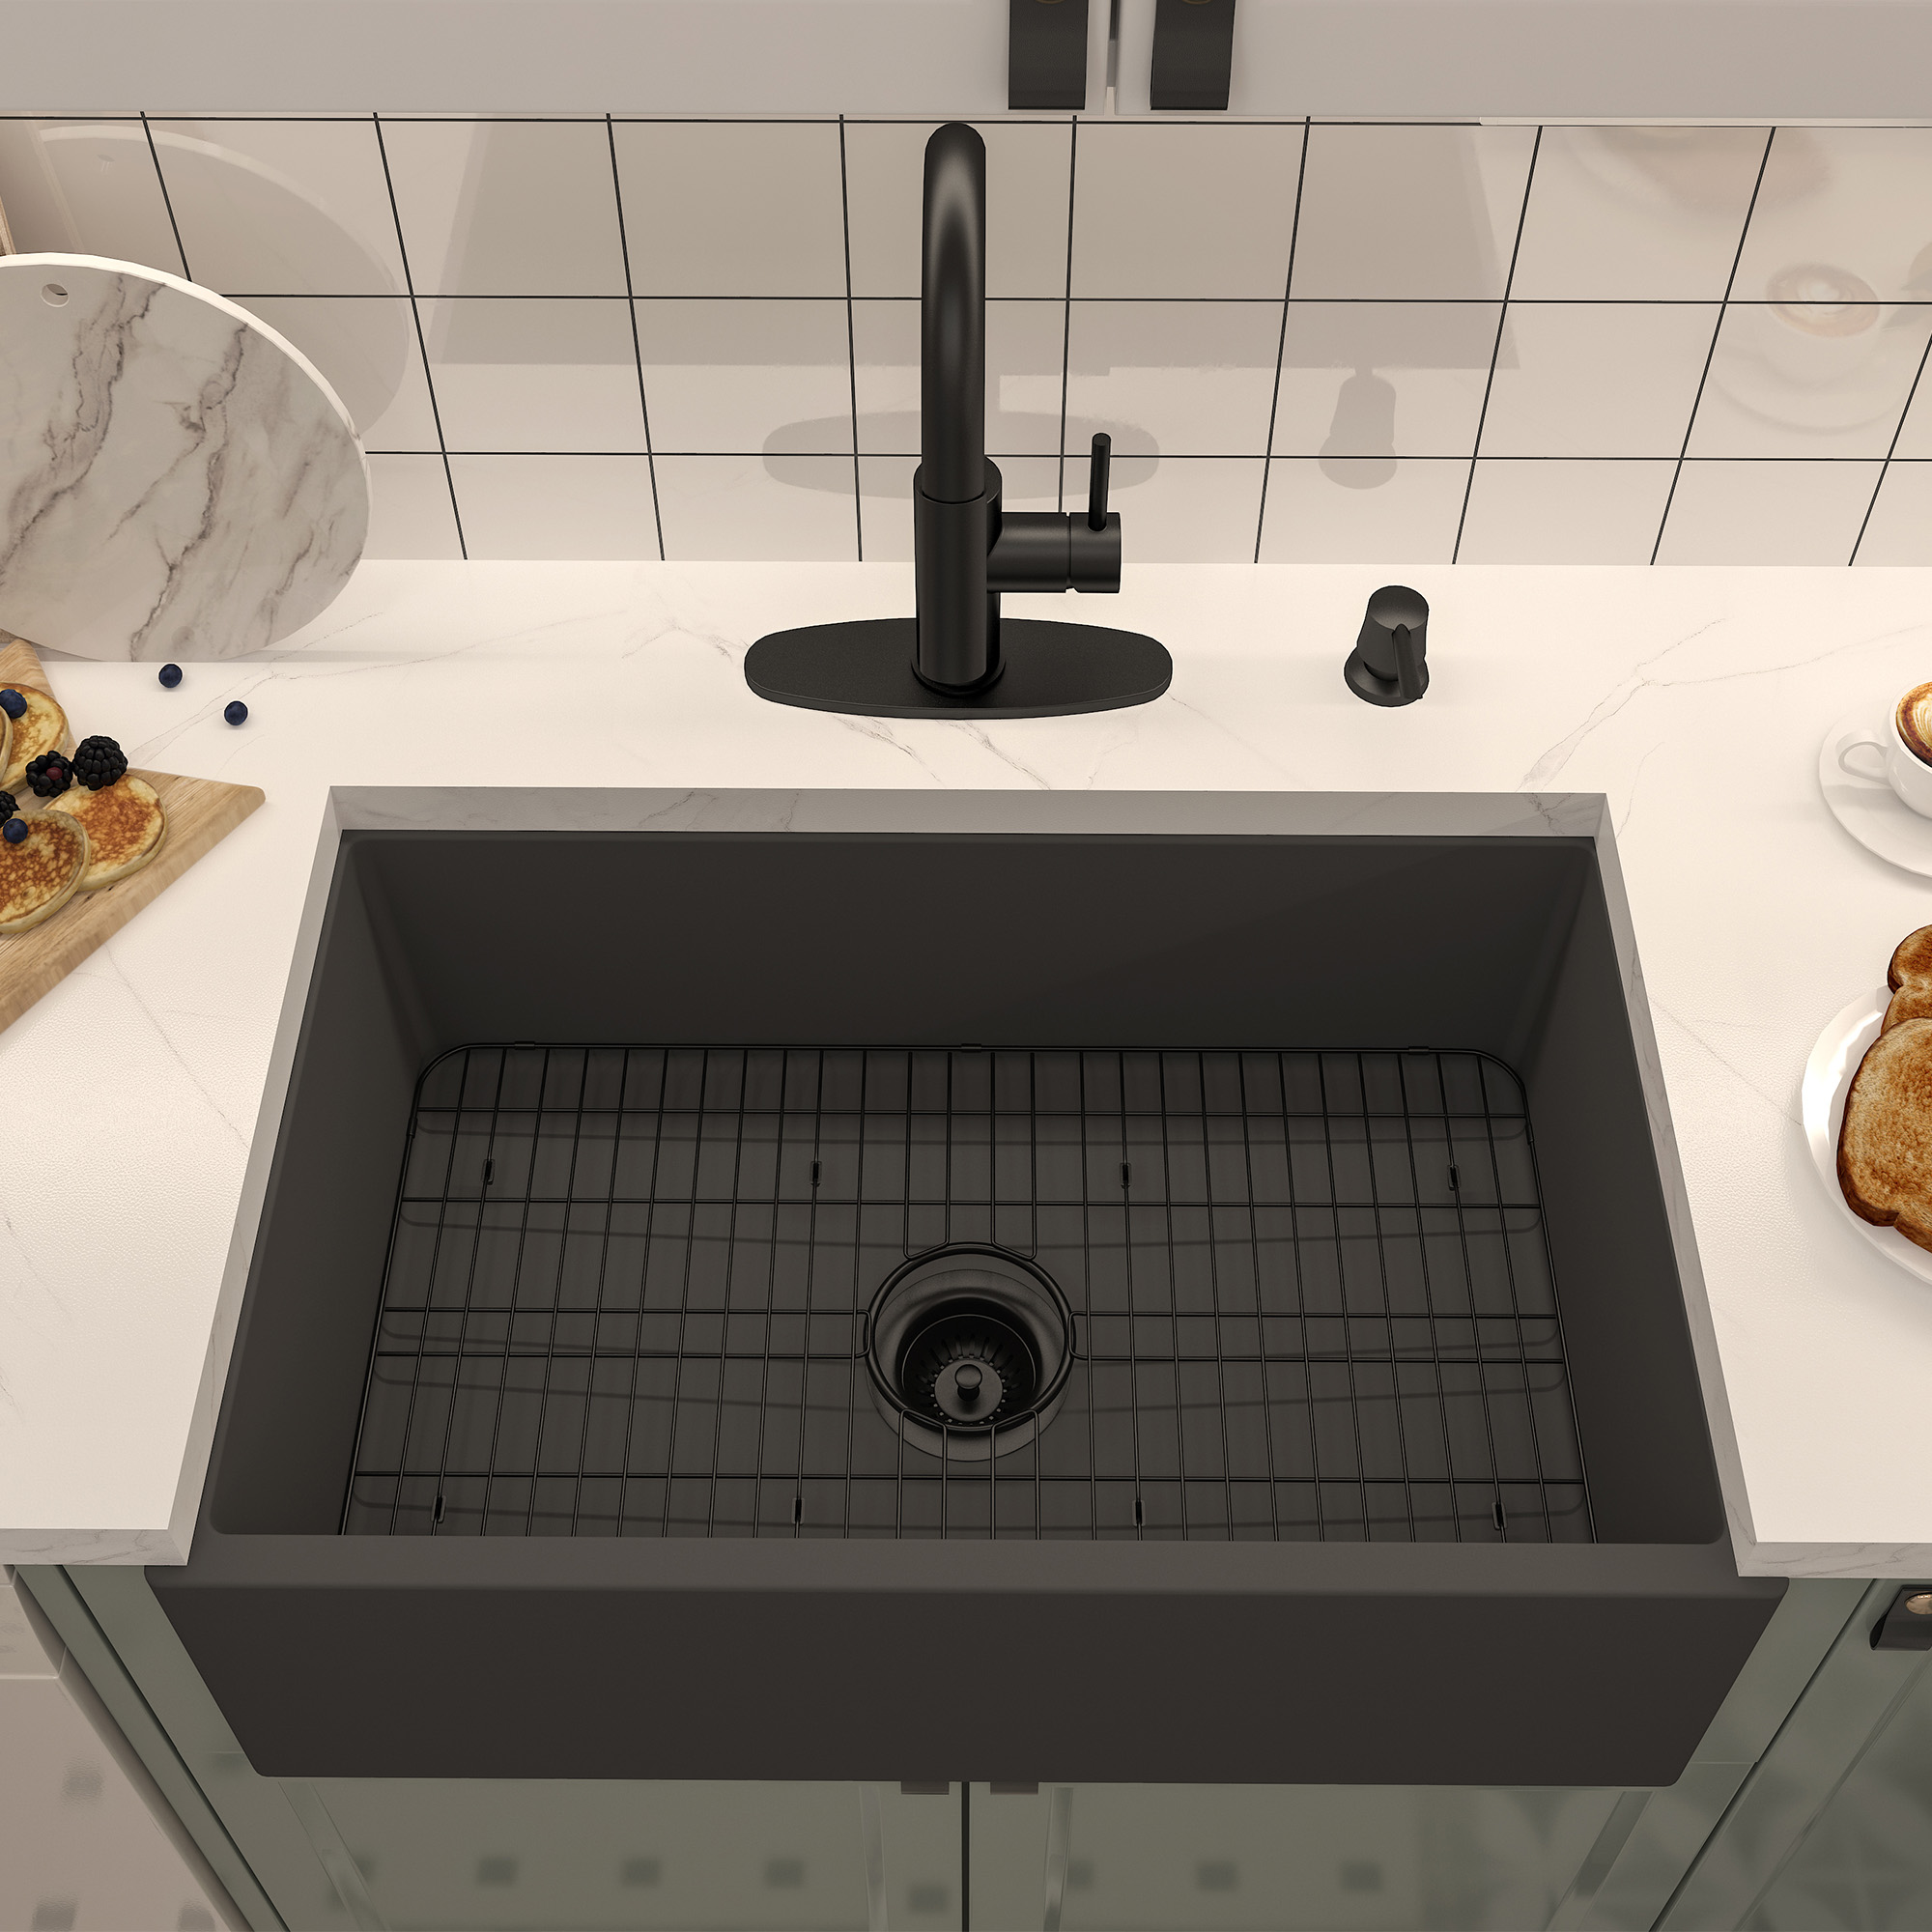 Concrete 30 in. Single Bowl Farmhouse Apron Kitchen Sink with Bottom Grid and Drainer Black Earth/Taupe Clay